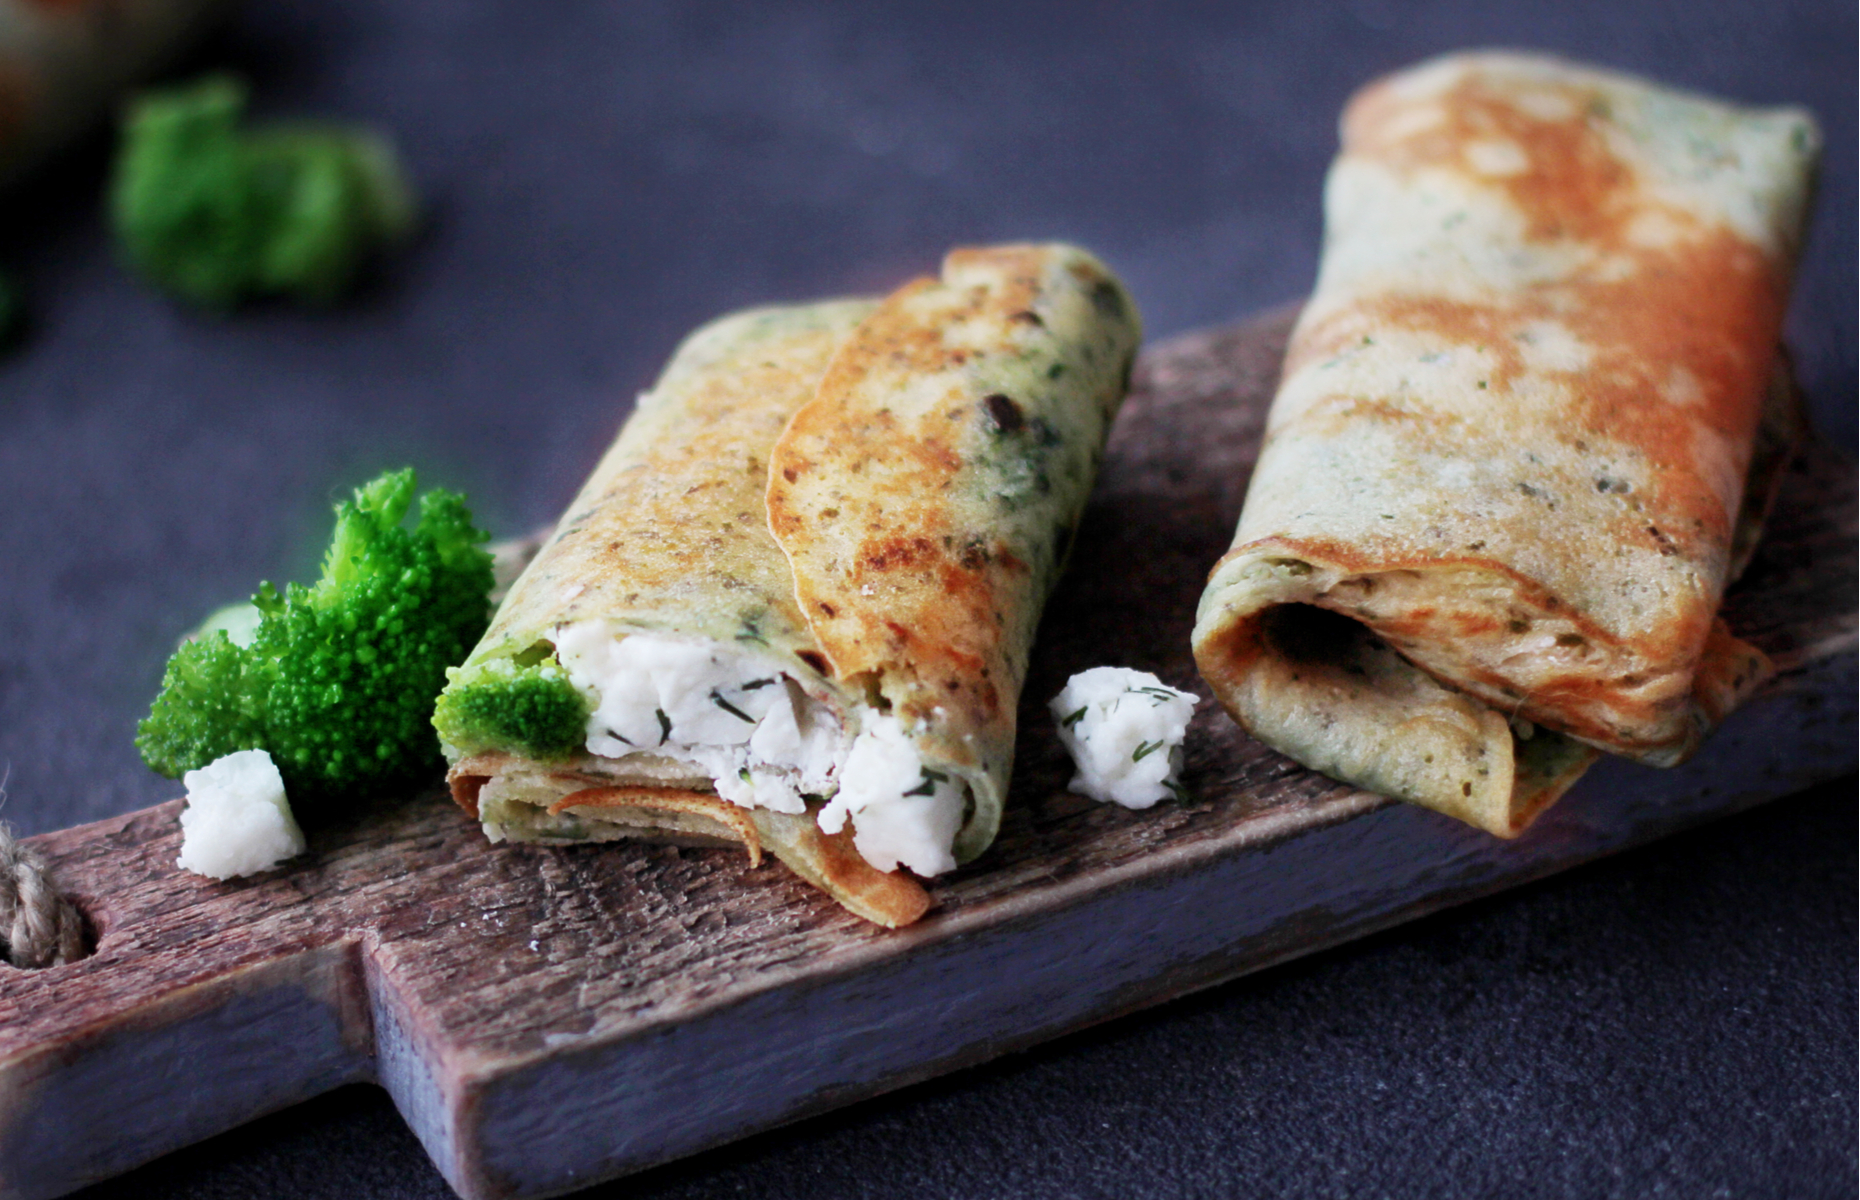 Cheese and broccoli pancakes (Image: amelameli/Shutterstock)